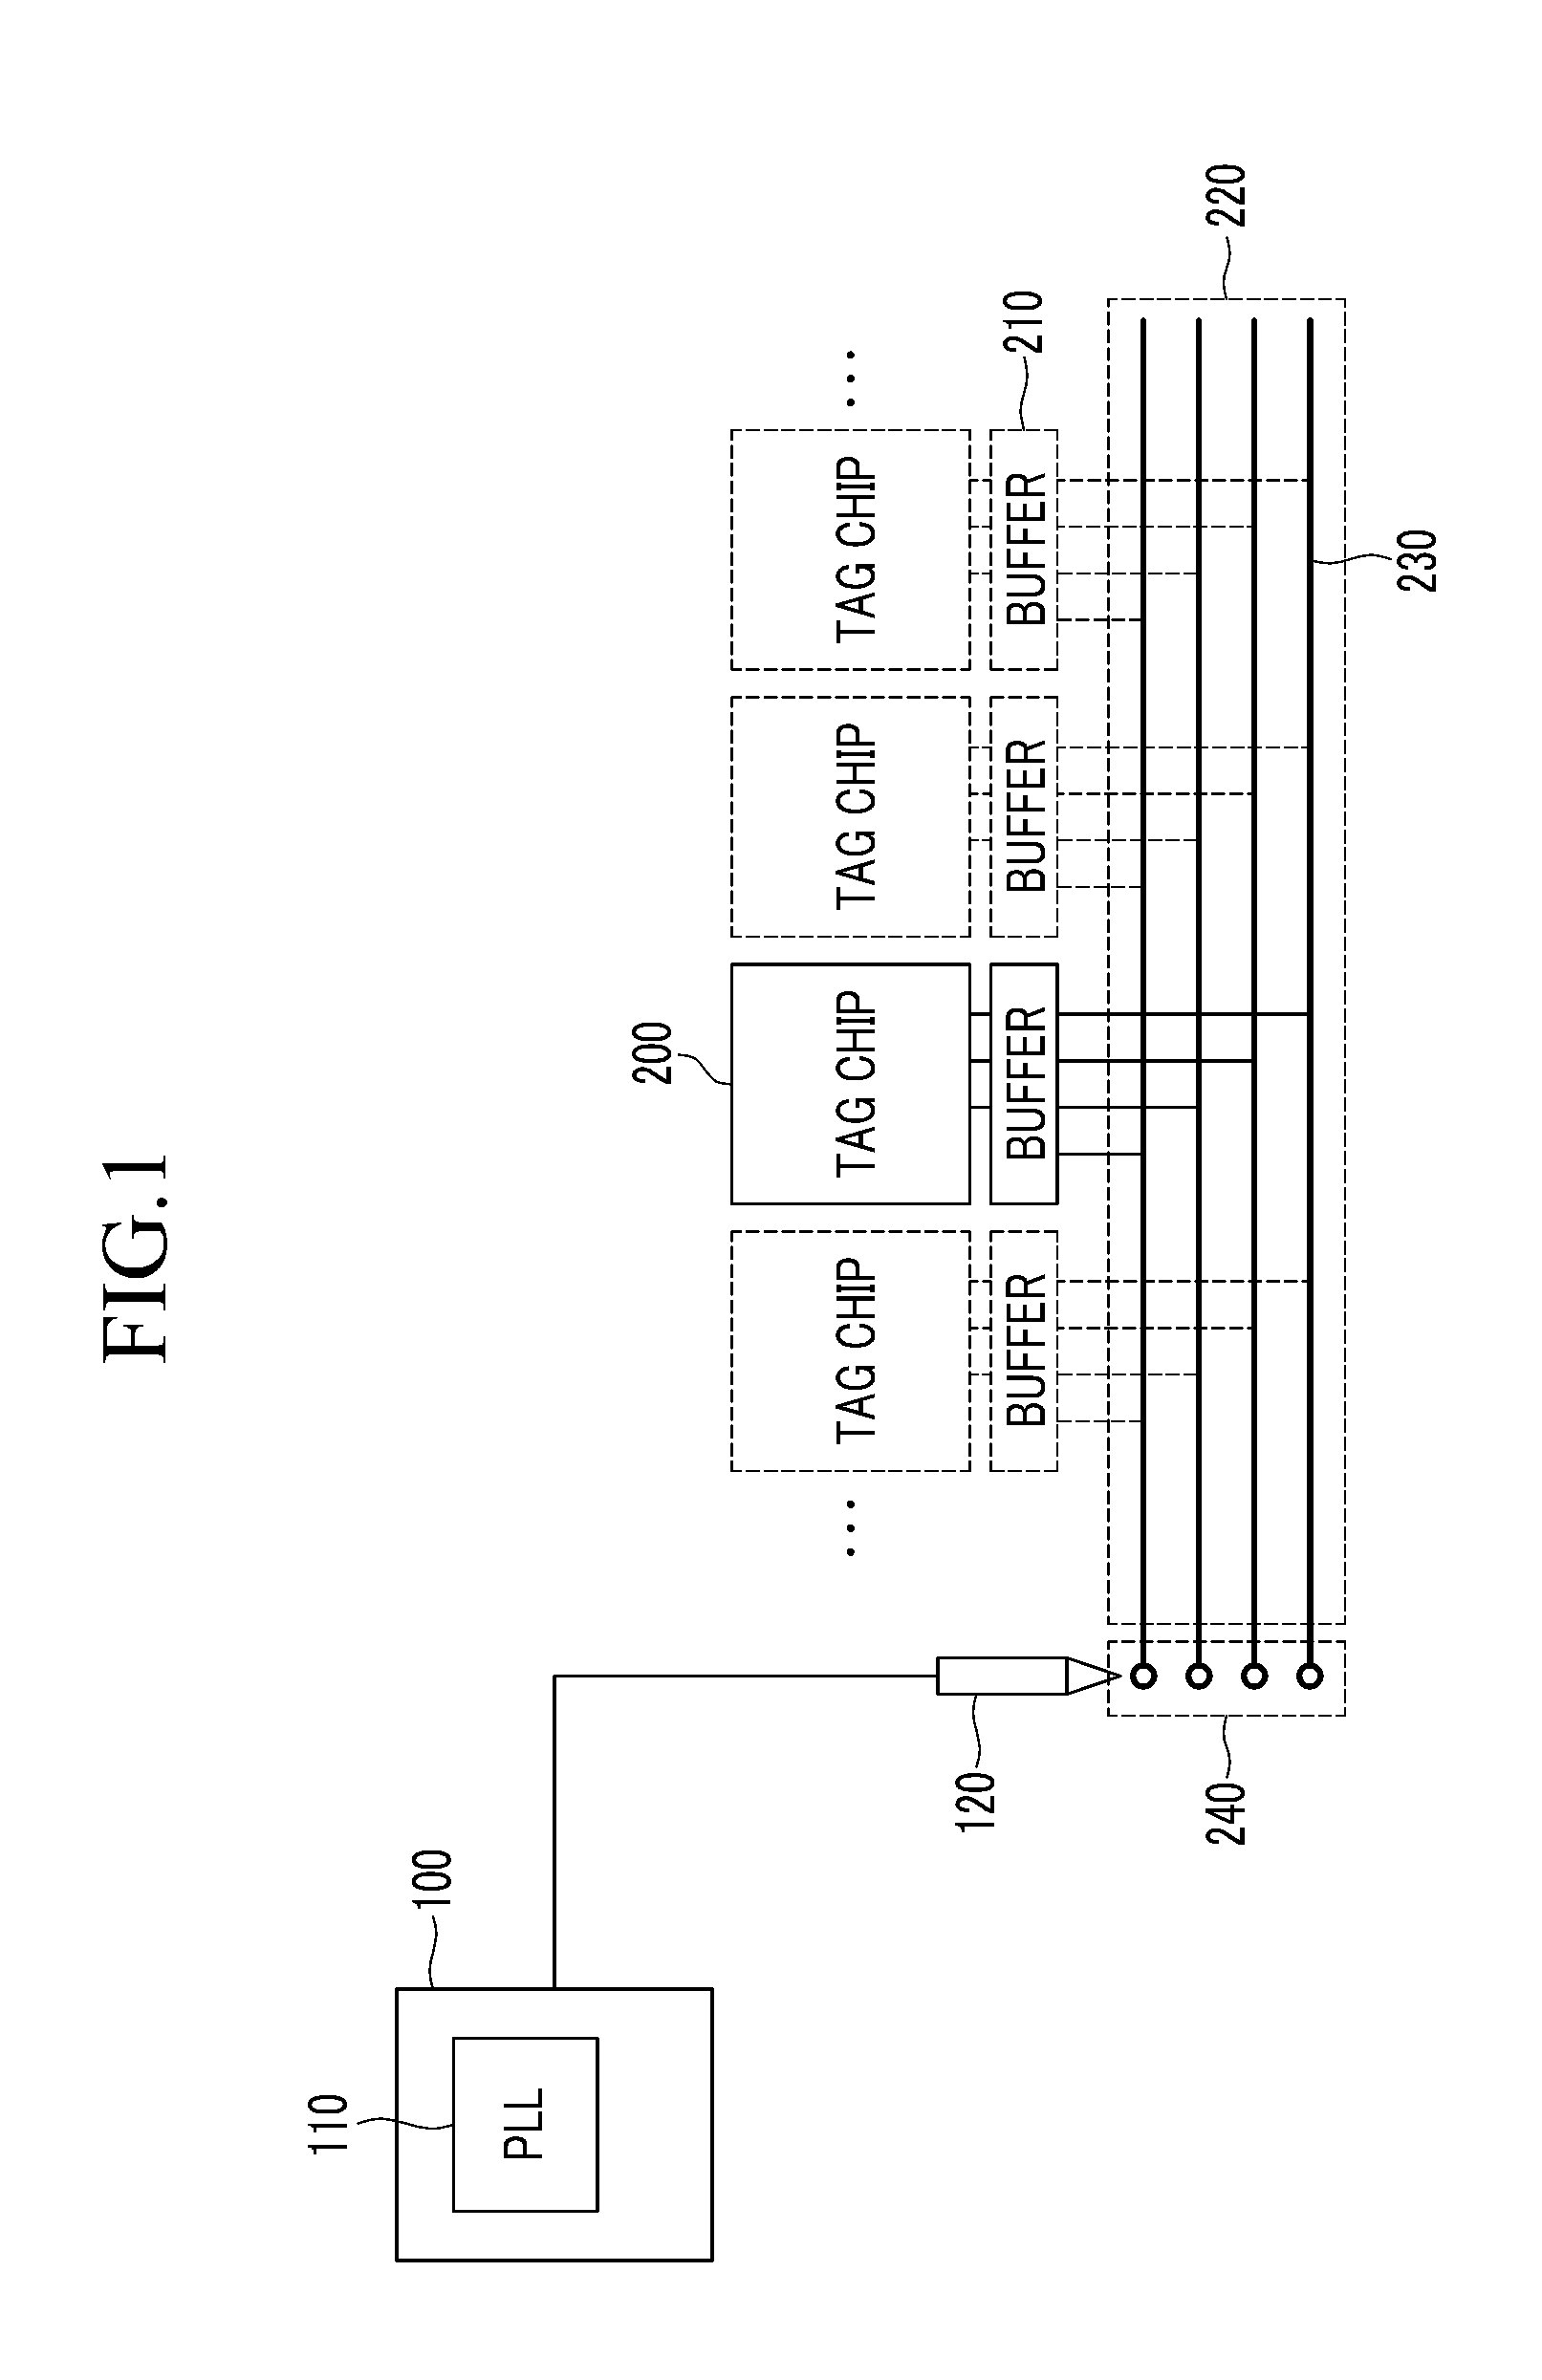 Semiconductor wafer and method for auto-calibrating integrated circuit chips using pll at wafer level